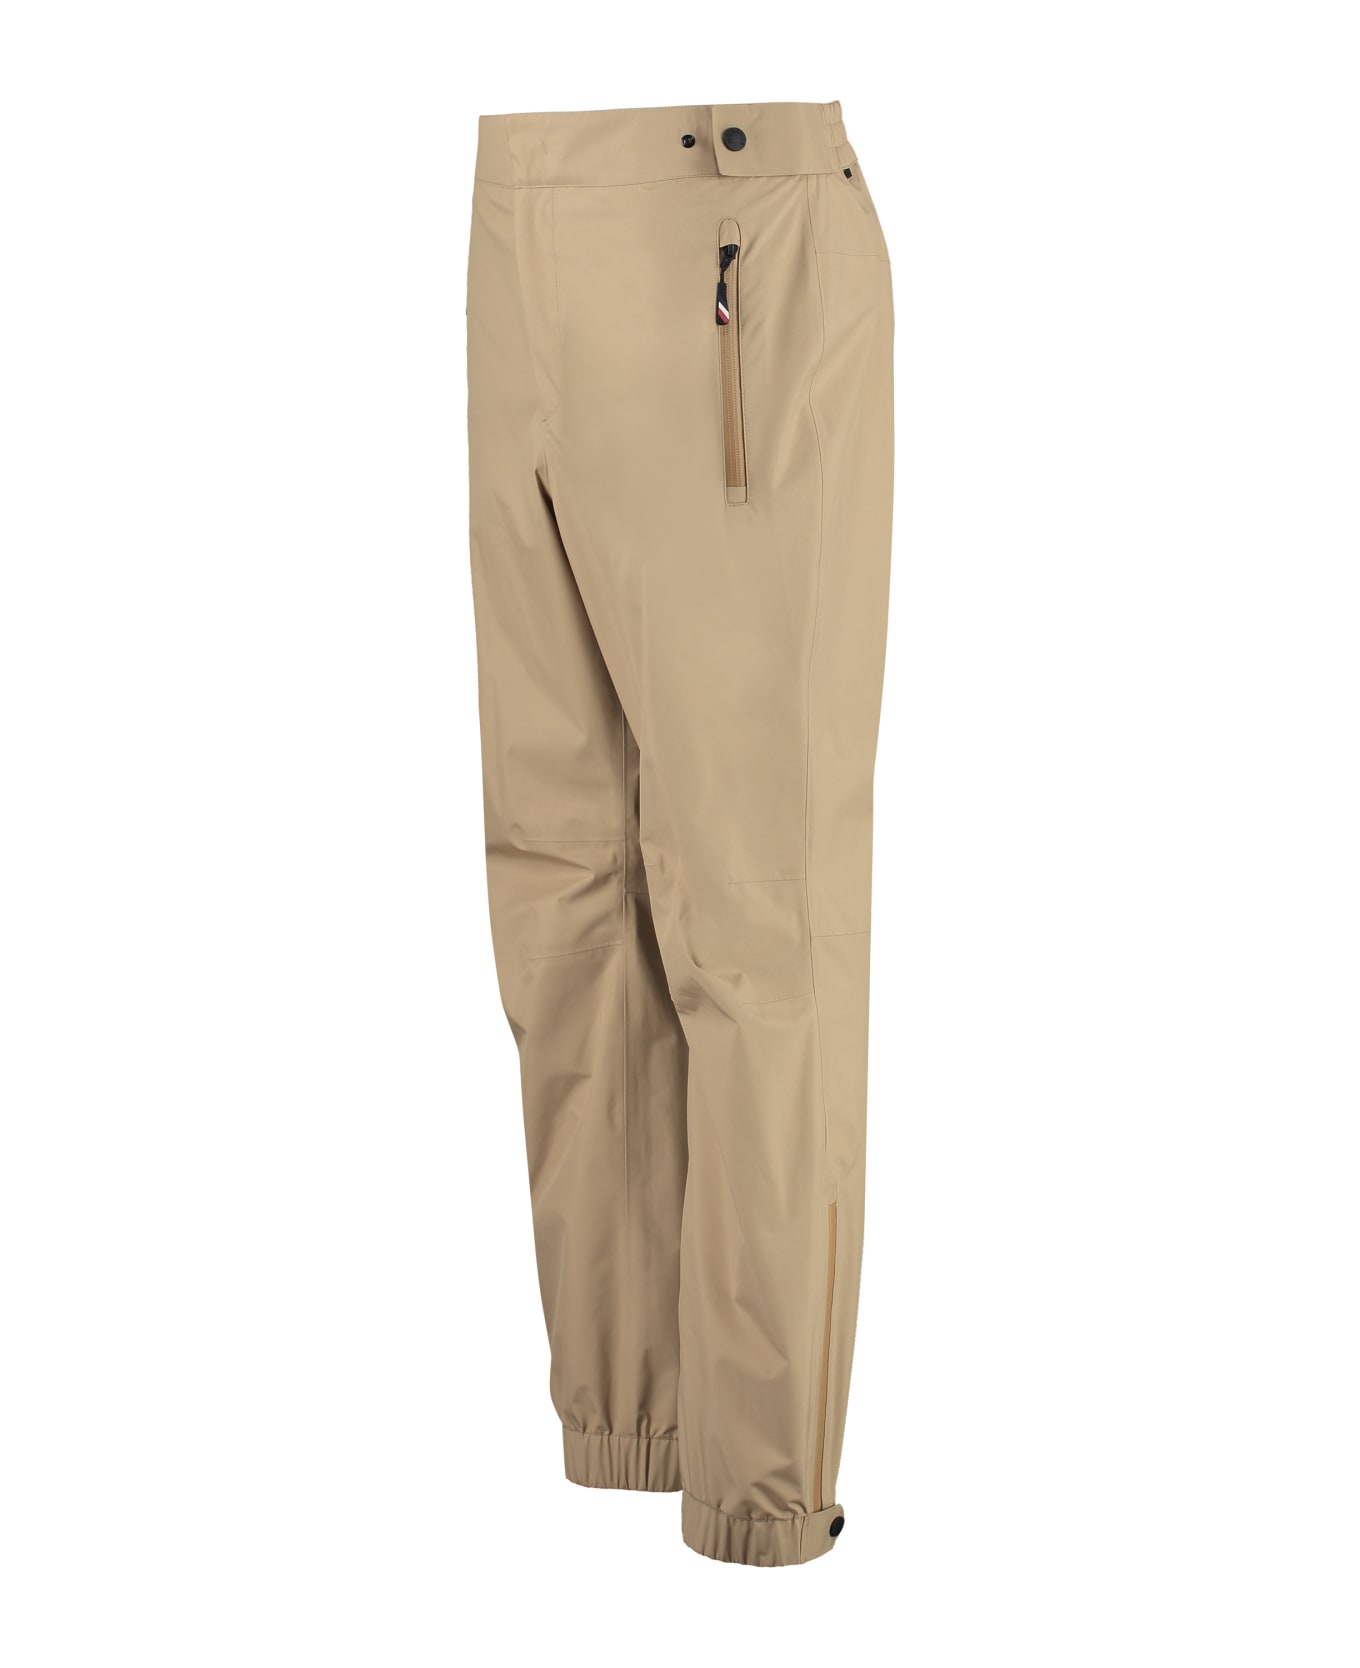 Moncler Grenoble Technical Fabric Pants - Beige ボトムス